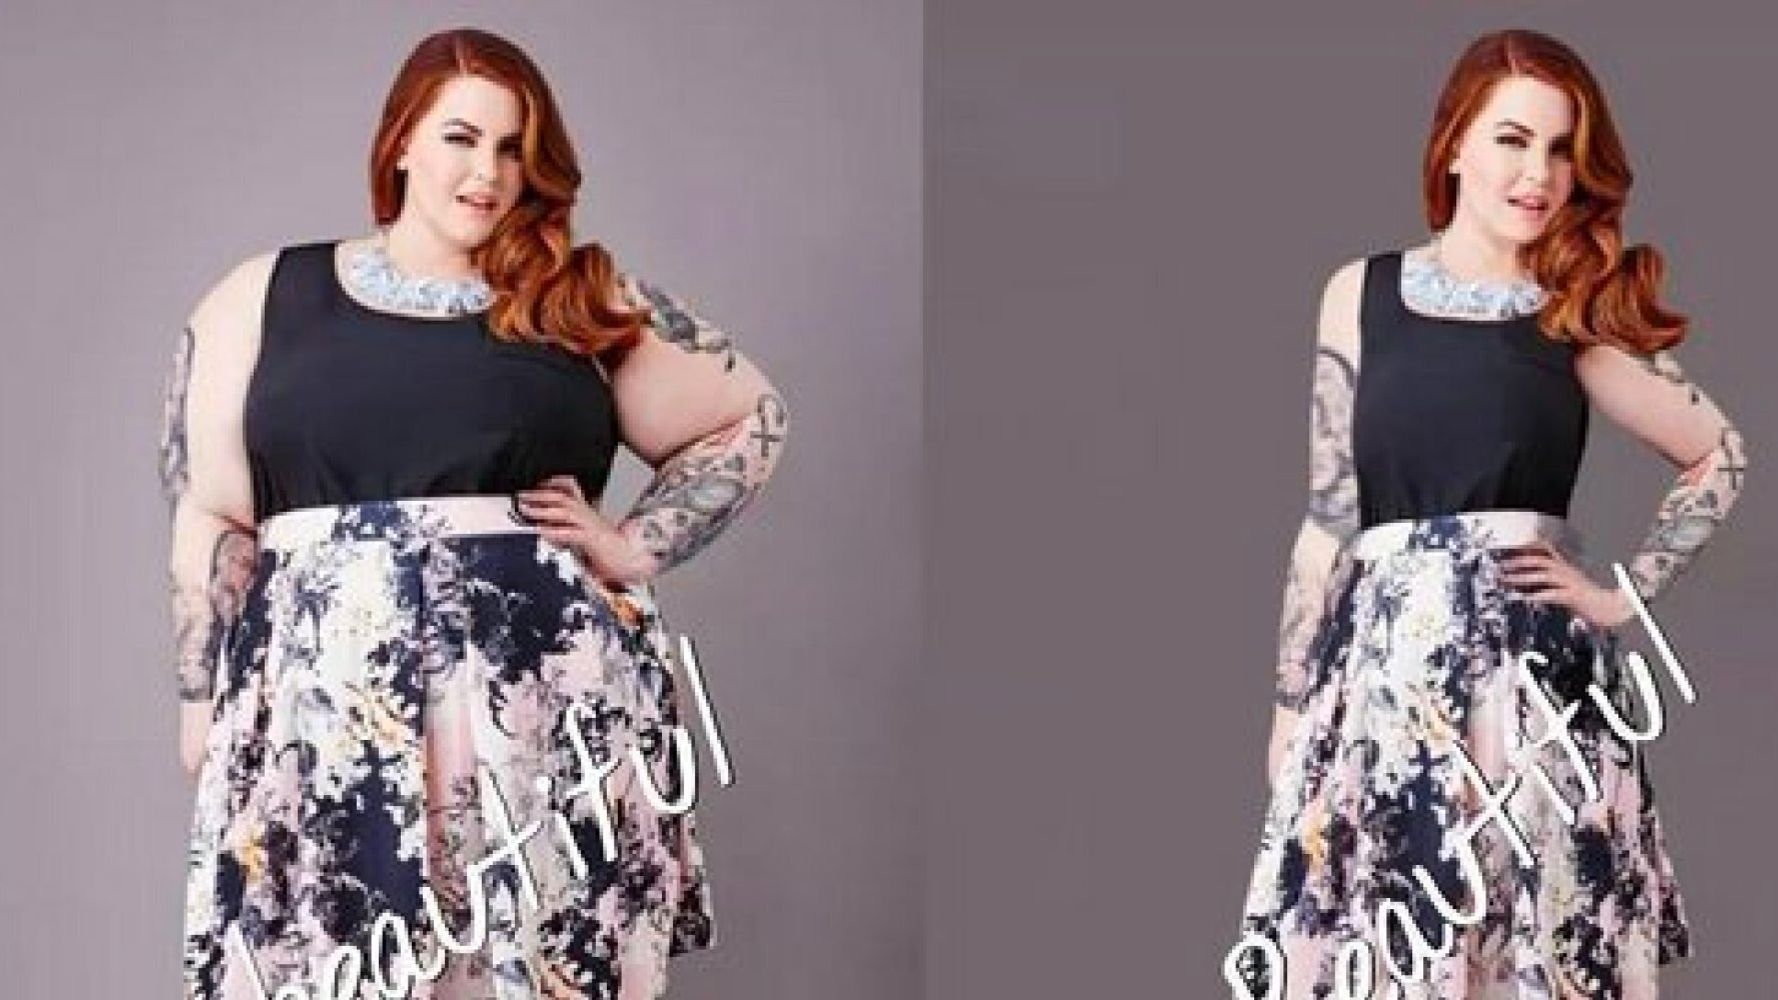 Plus Size Women Photoshopped To Look Thinner In Horrendous Social